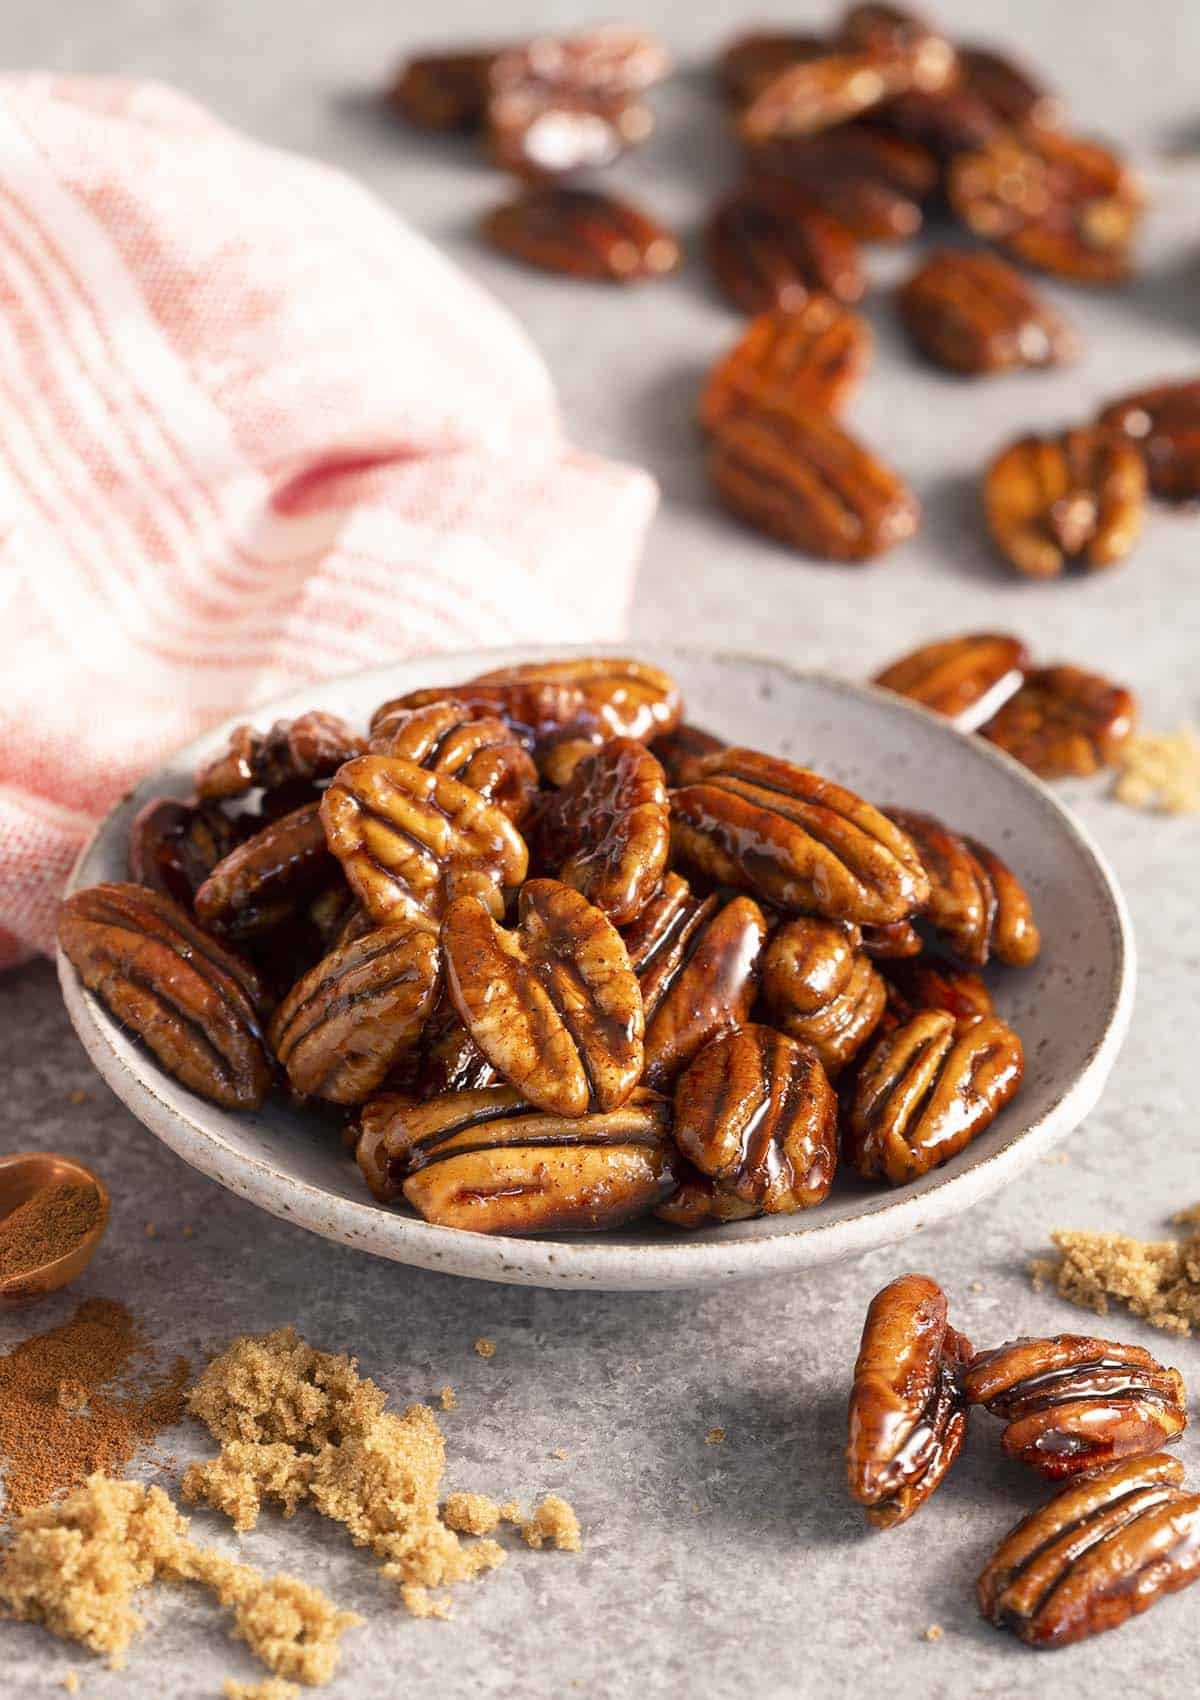 A plate of candied pecans next to some brown sugar.